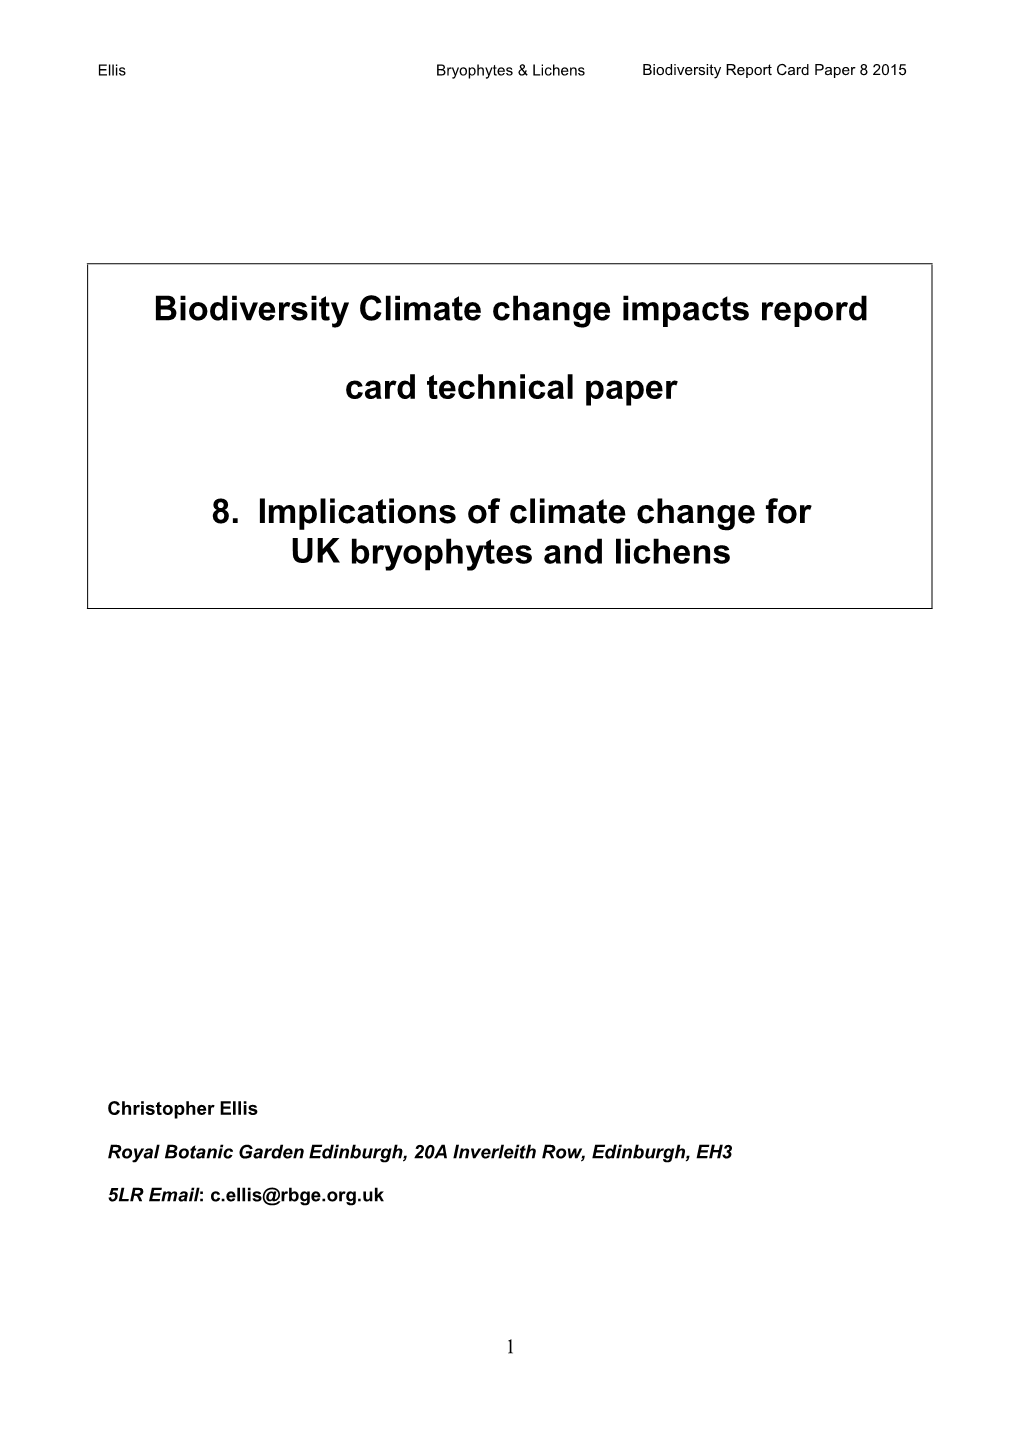 Implications of Climate Change for UK Bryophytes and Lichens